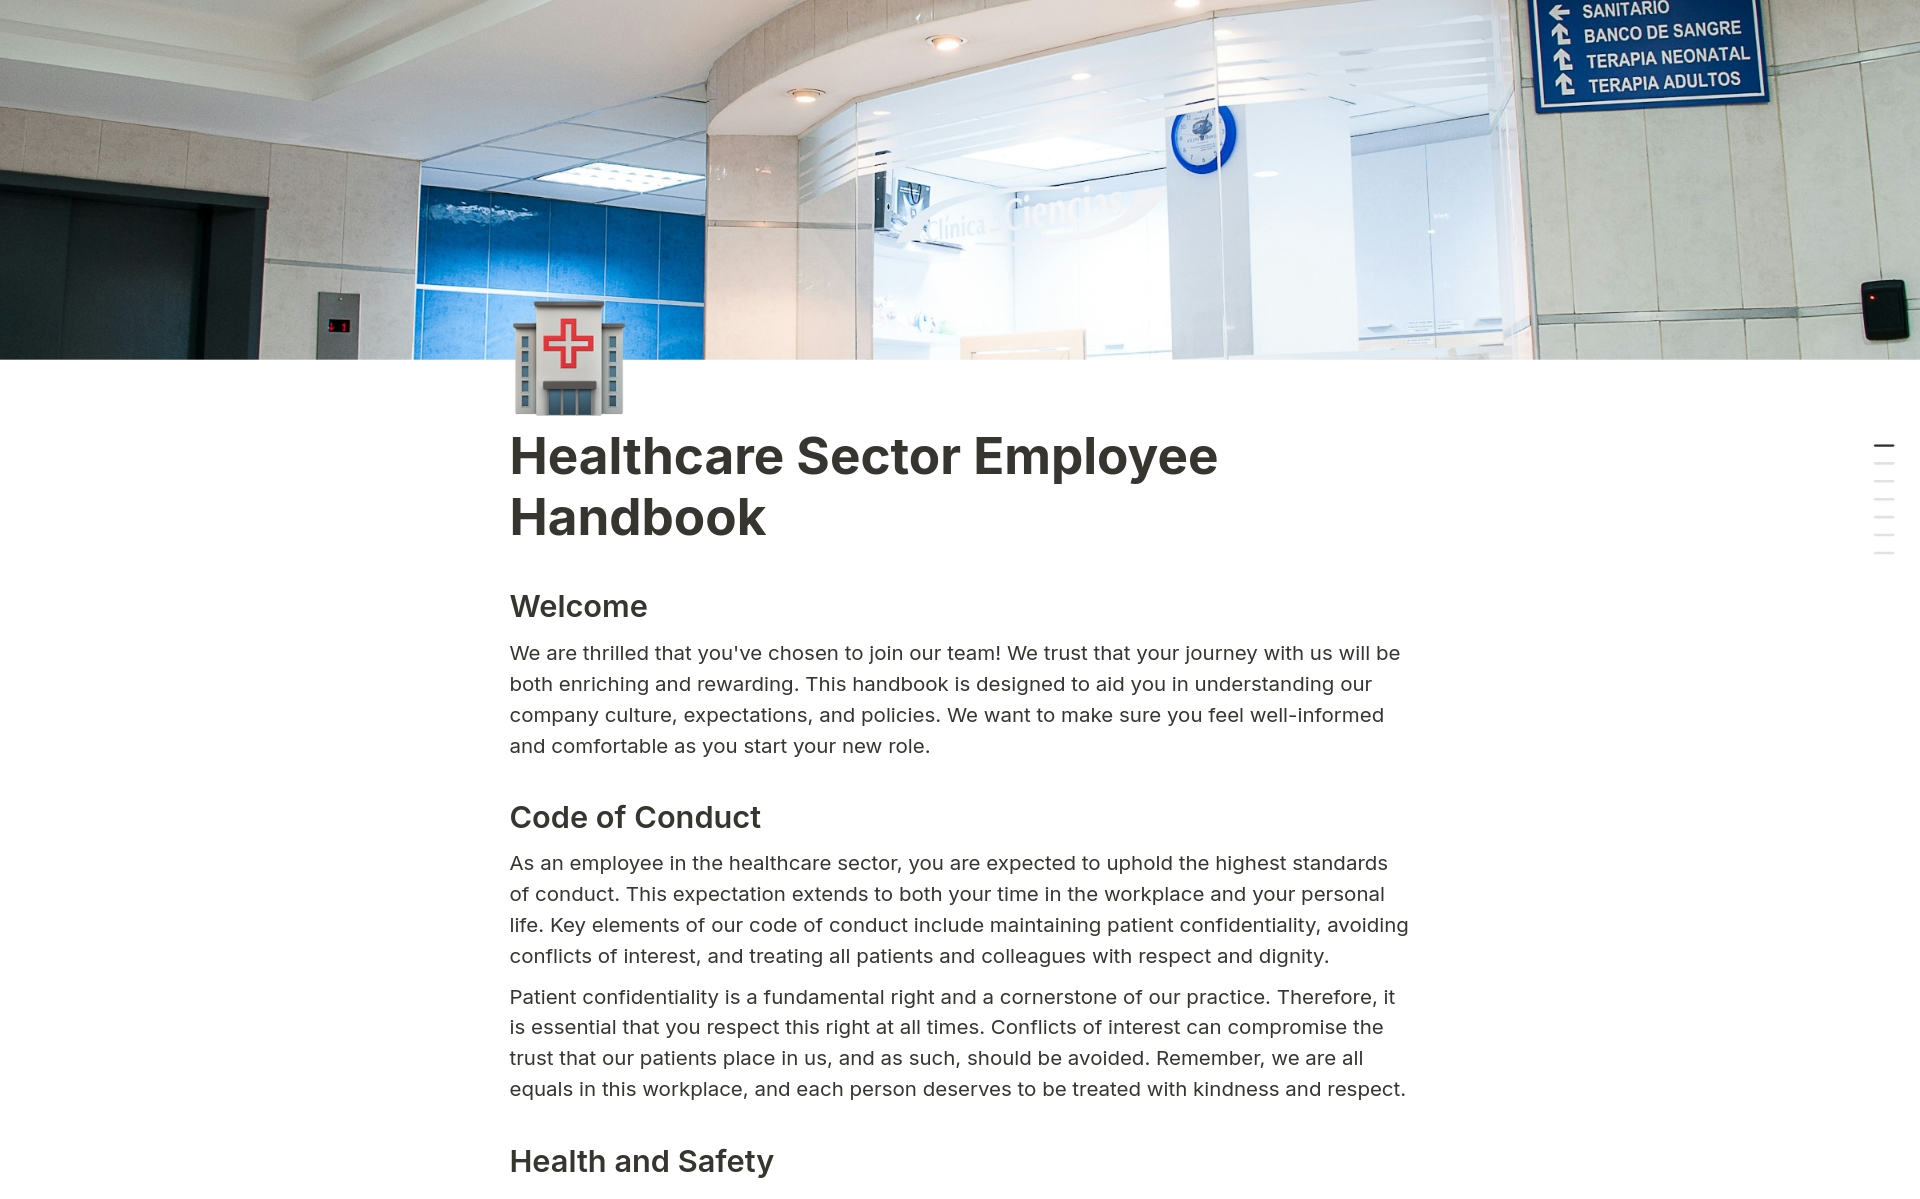 Detailed guide for healthcare employees, covering medical protocols, patient care standards, and organizational policies.